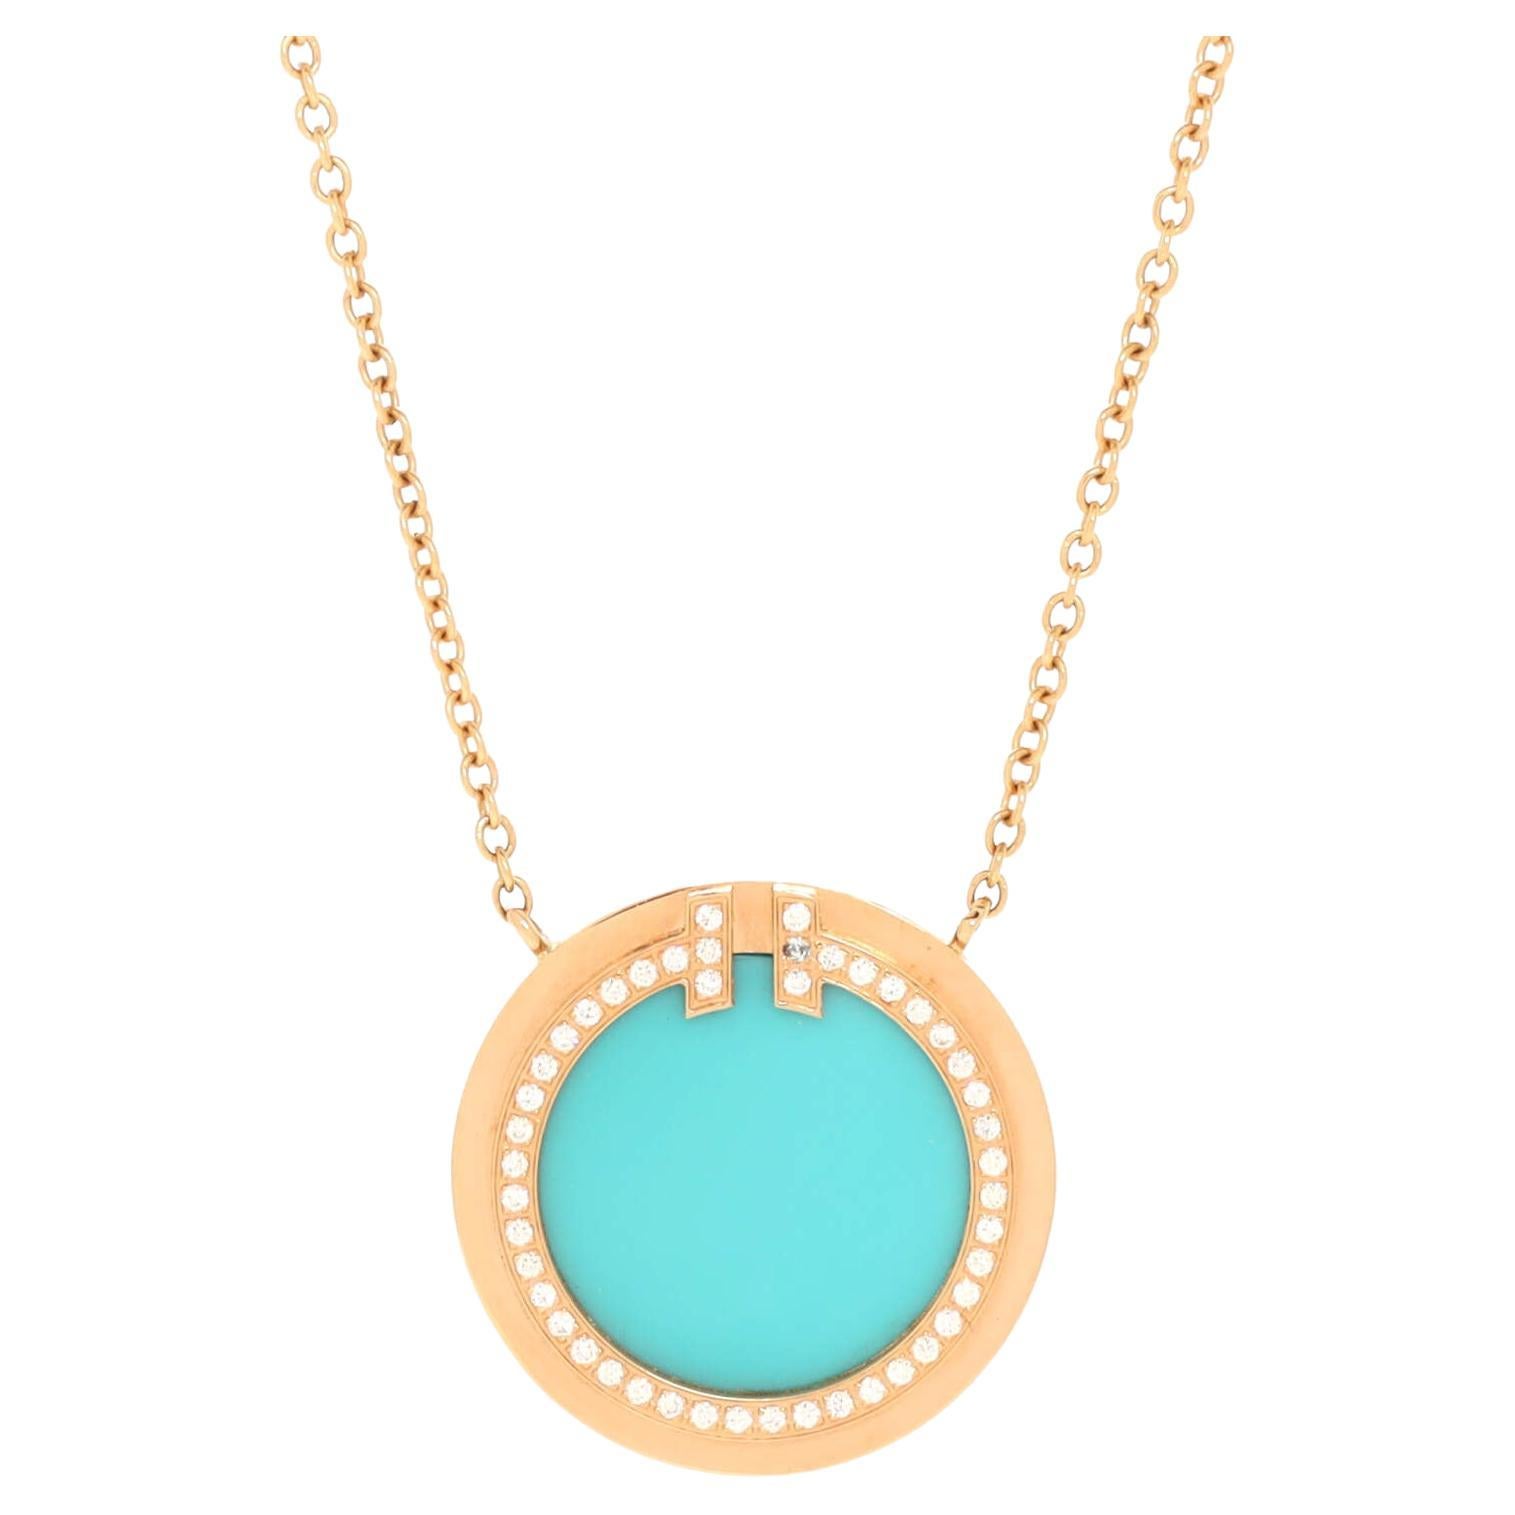 Tiffany & Co. T Circle Pendant Necklace 18K Rose Gold with Turquoise